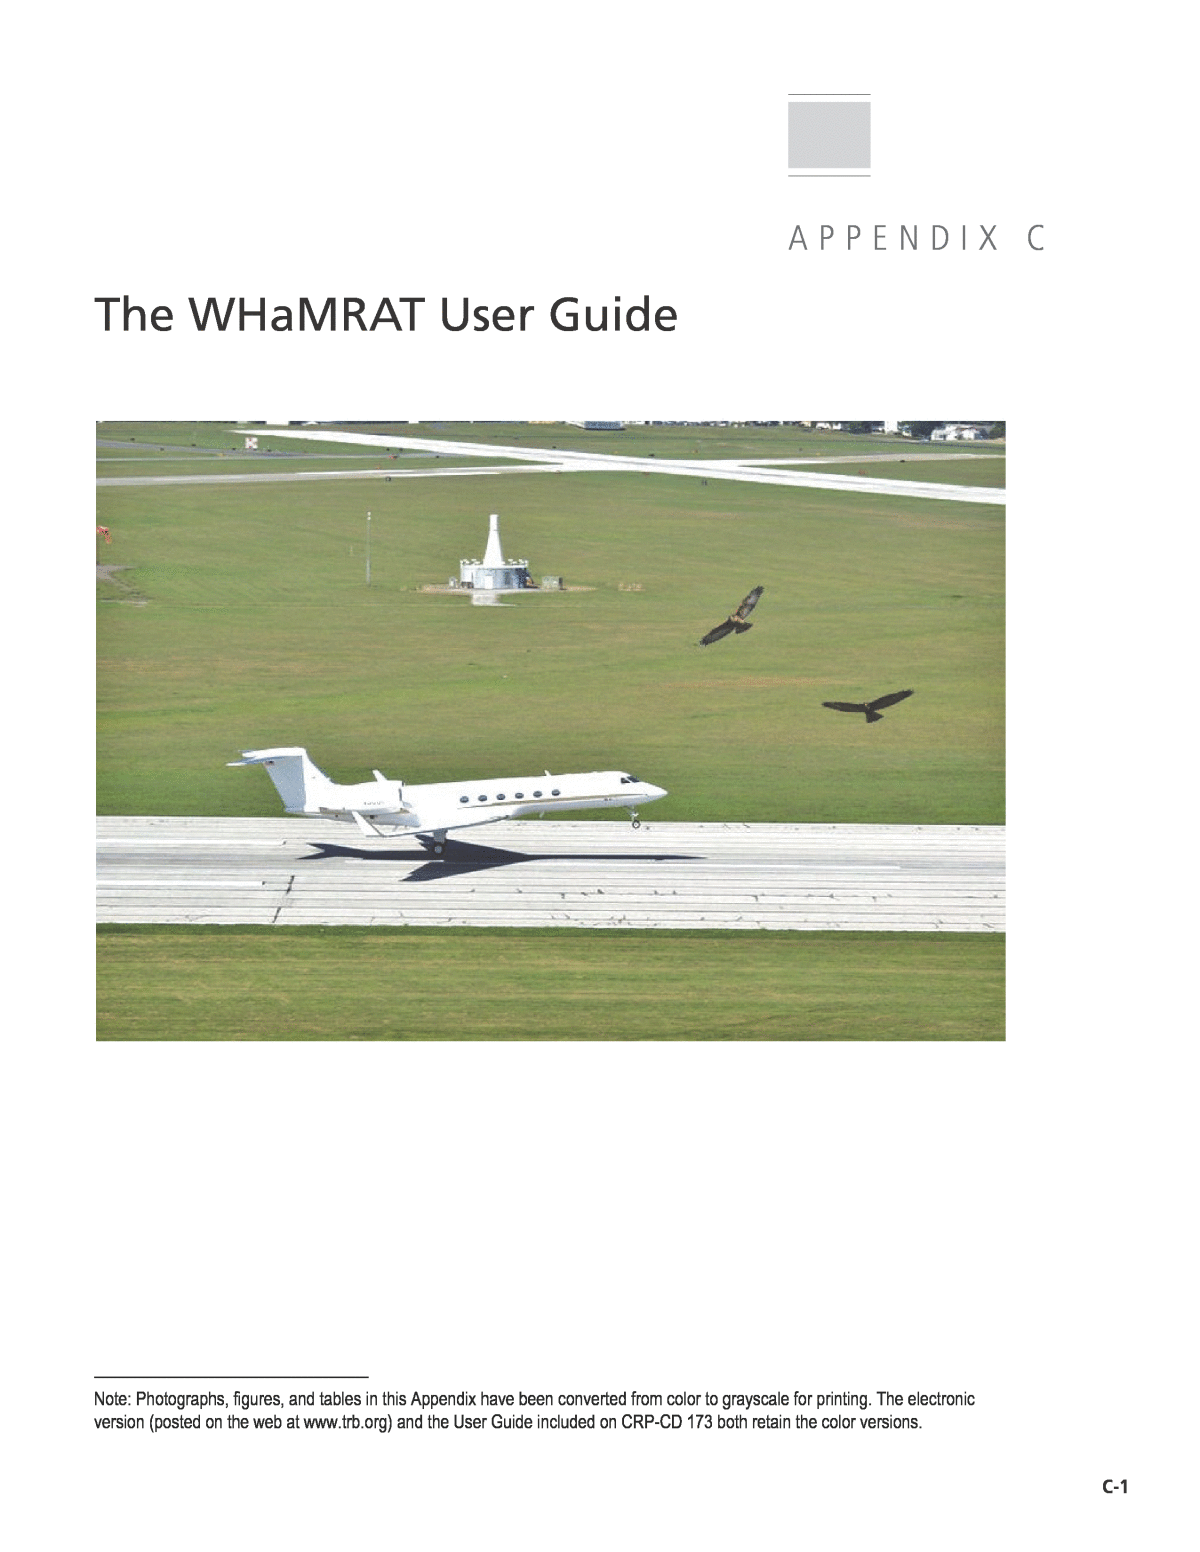 Appendix C - The WHaMRAT User Guide, Applying an SMS Approach to Wildlife  Hazard Management